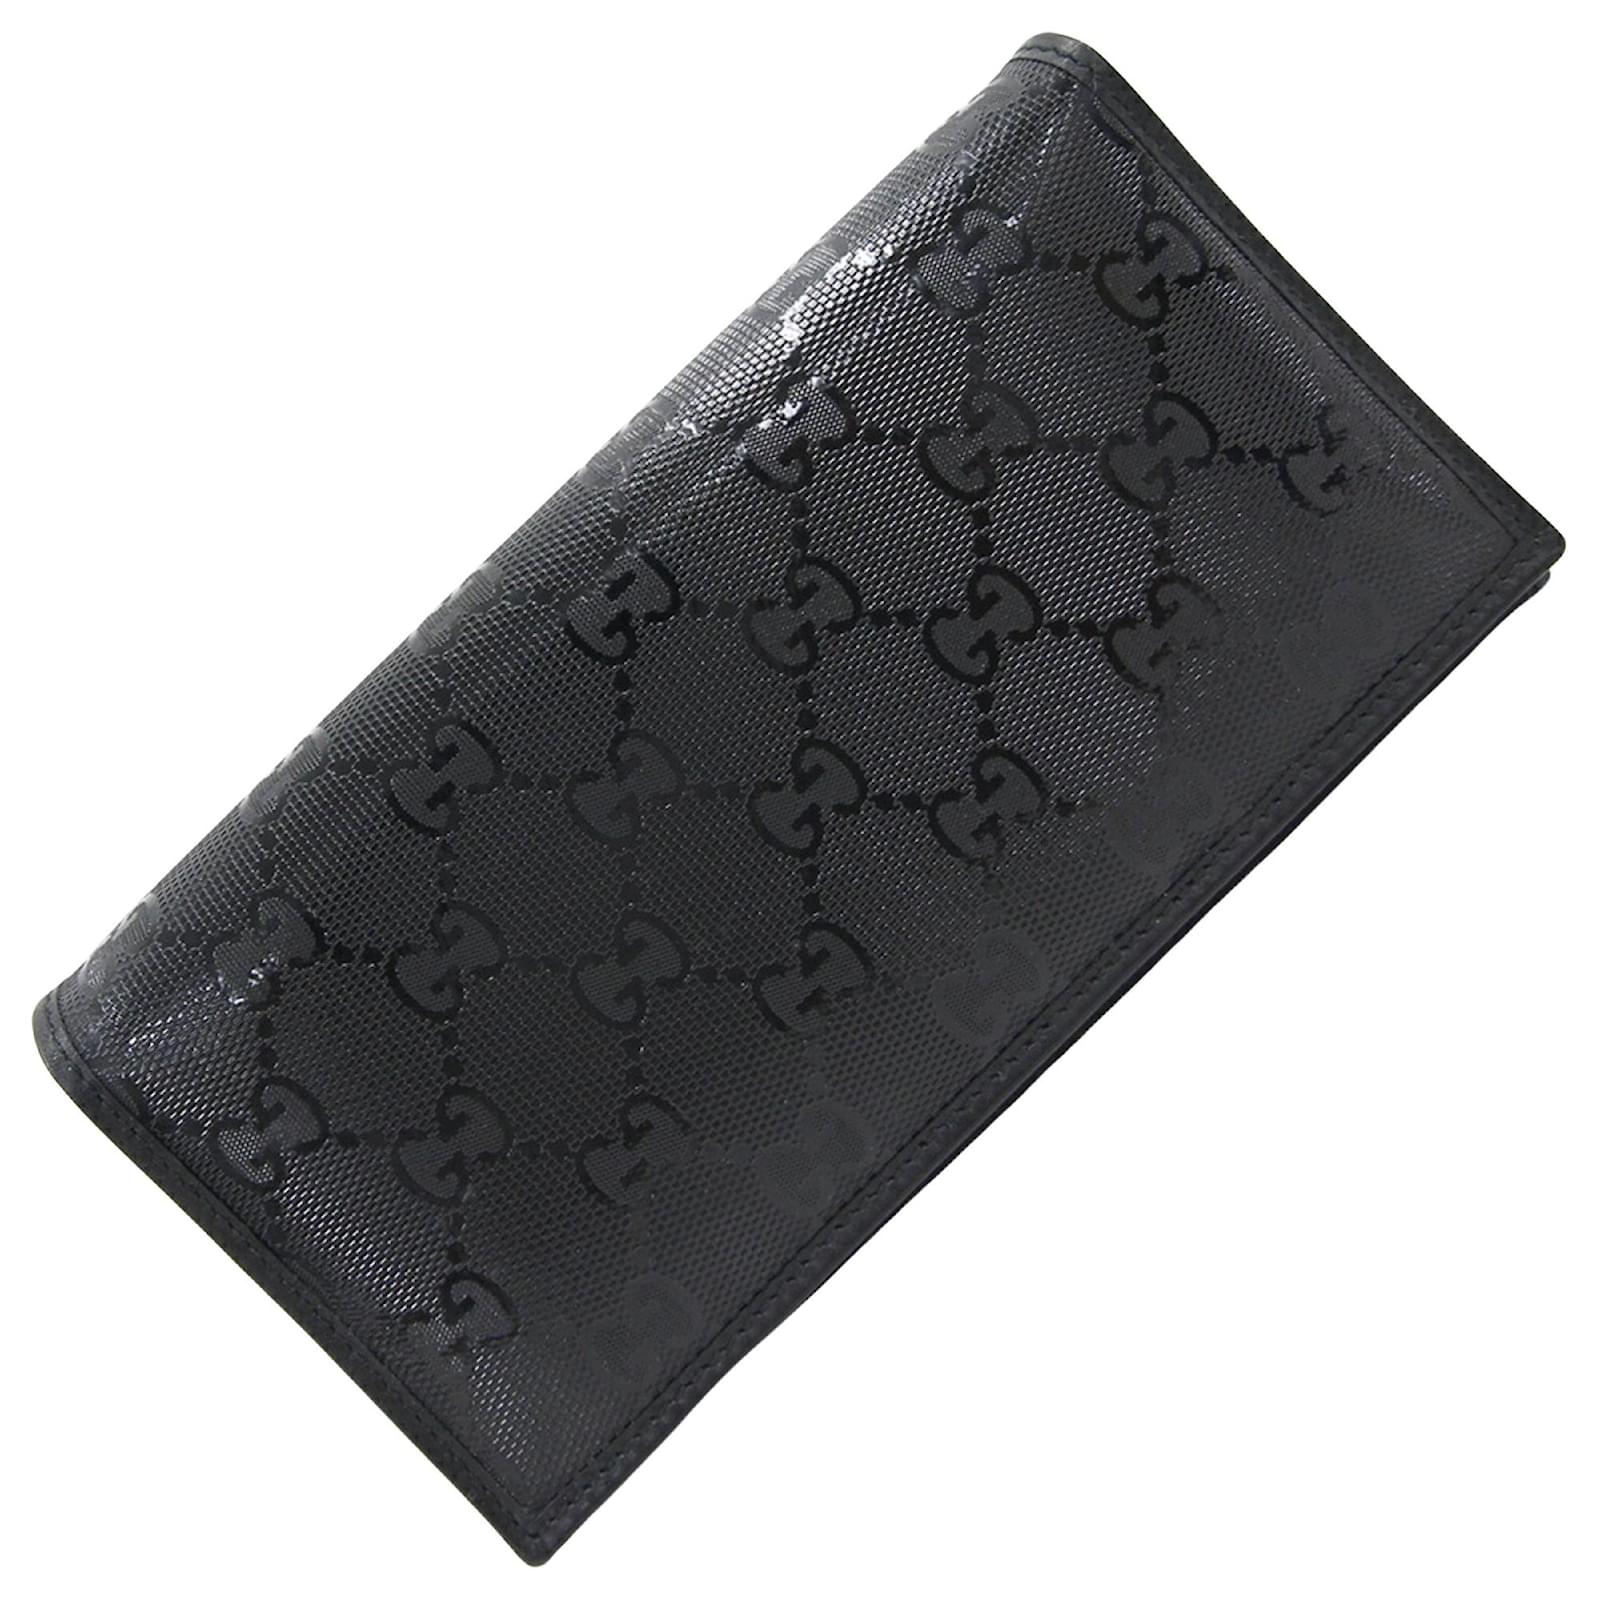 Gucci Leather Mini Wallet With Logo in Black for Men